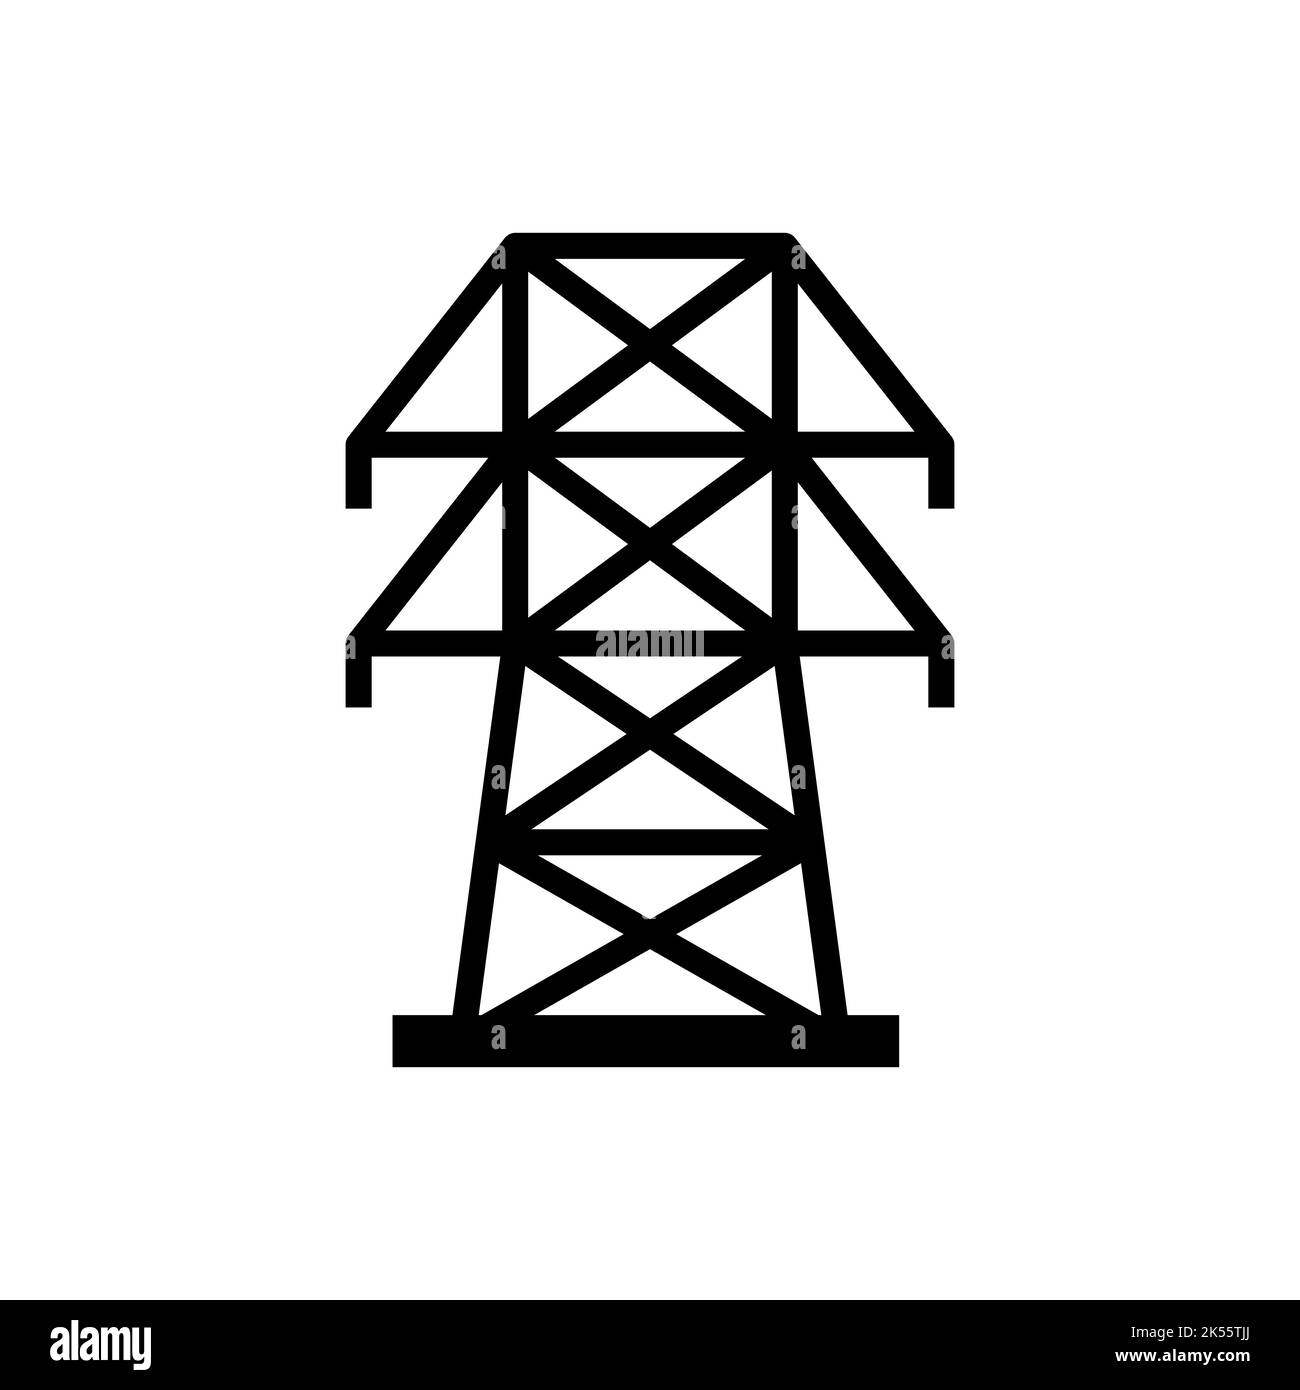 Electricity pole infrastructure concept icons Stock Vector